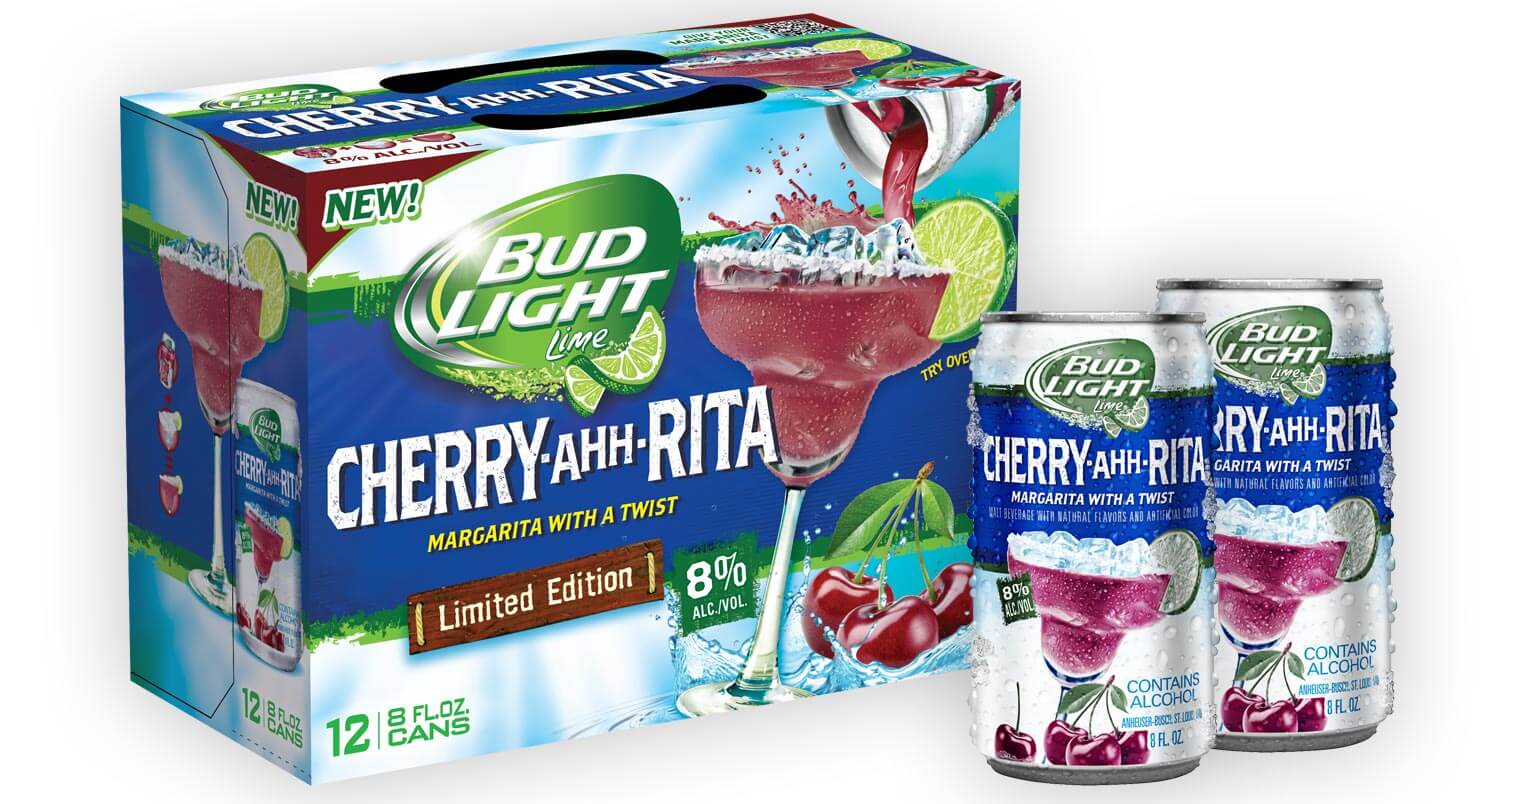 Lime-A-Rita Introduces Cherry-Ahh-Rita, featured image